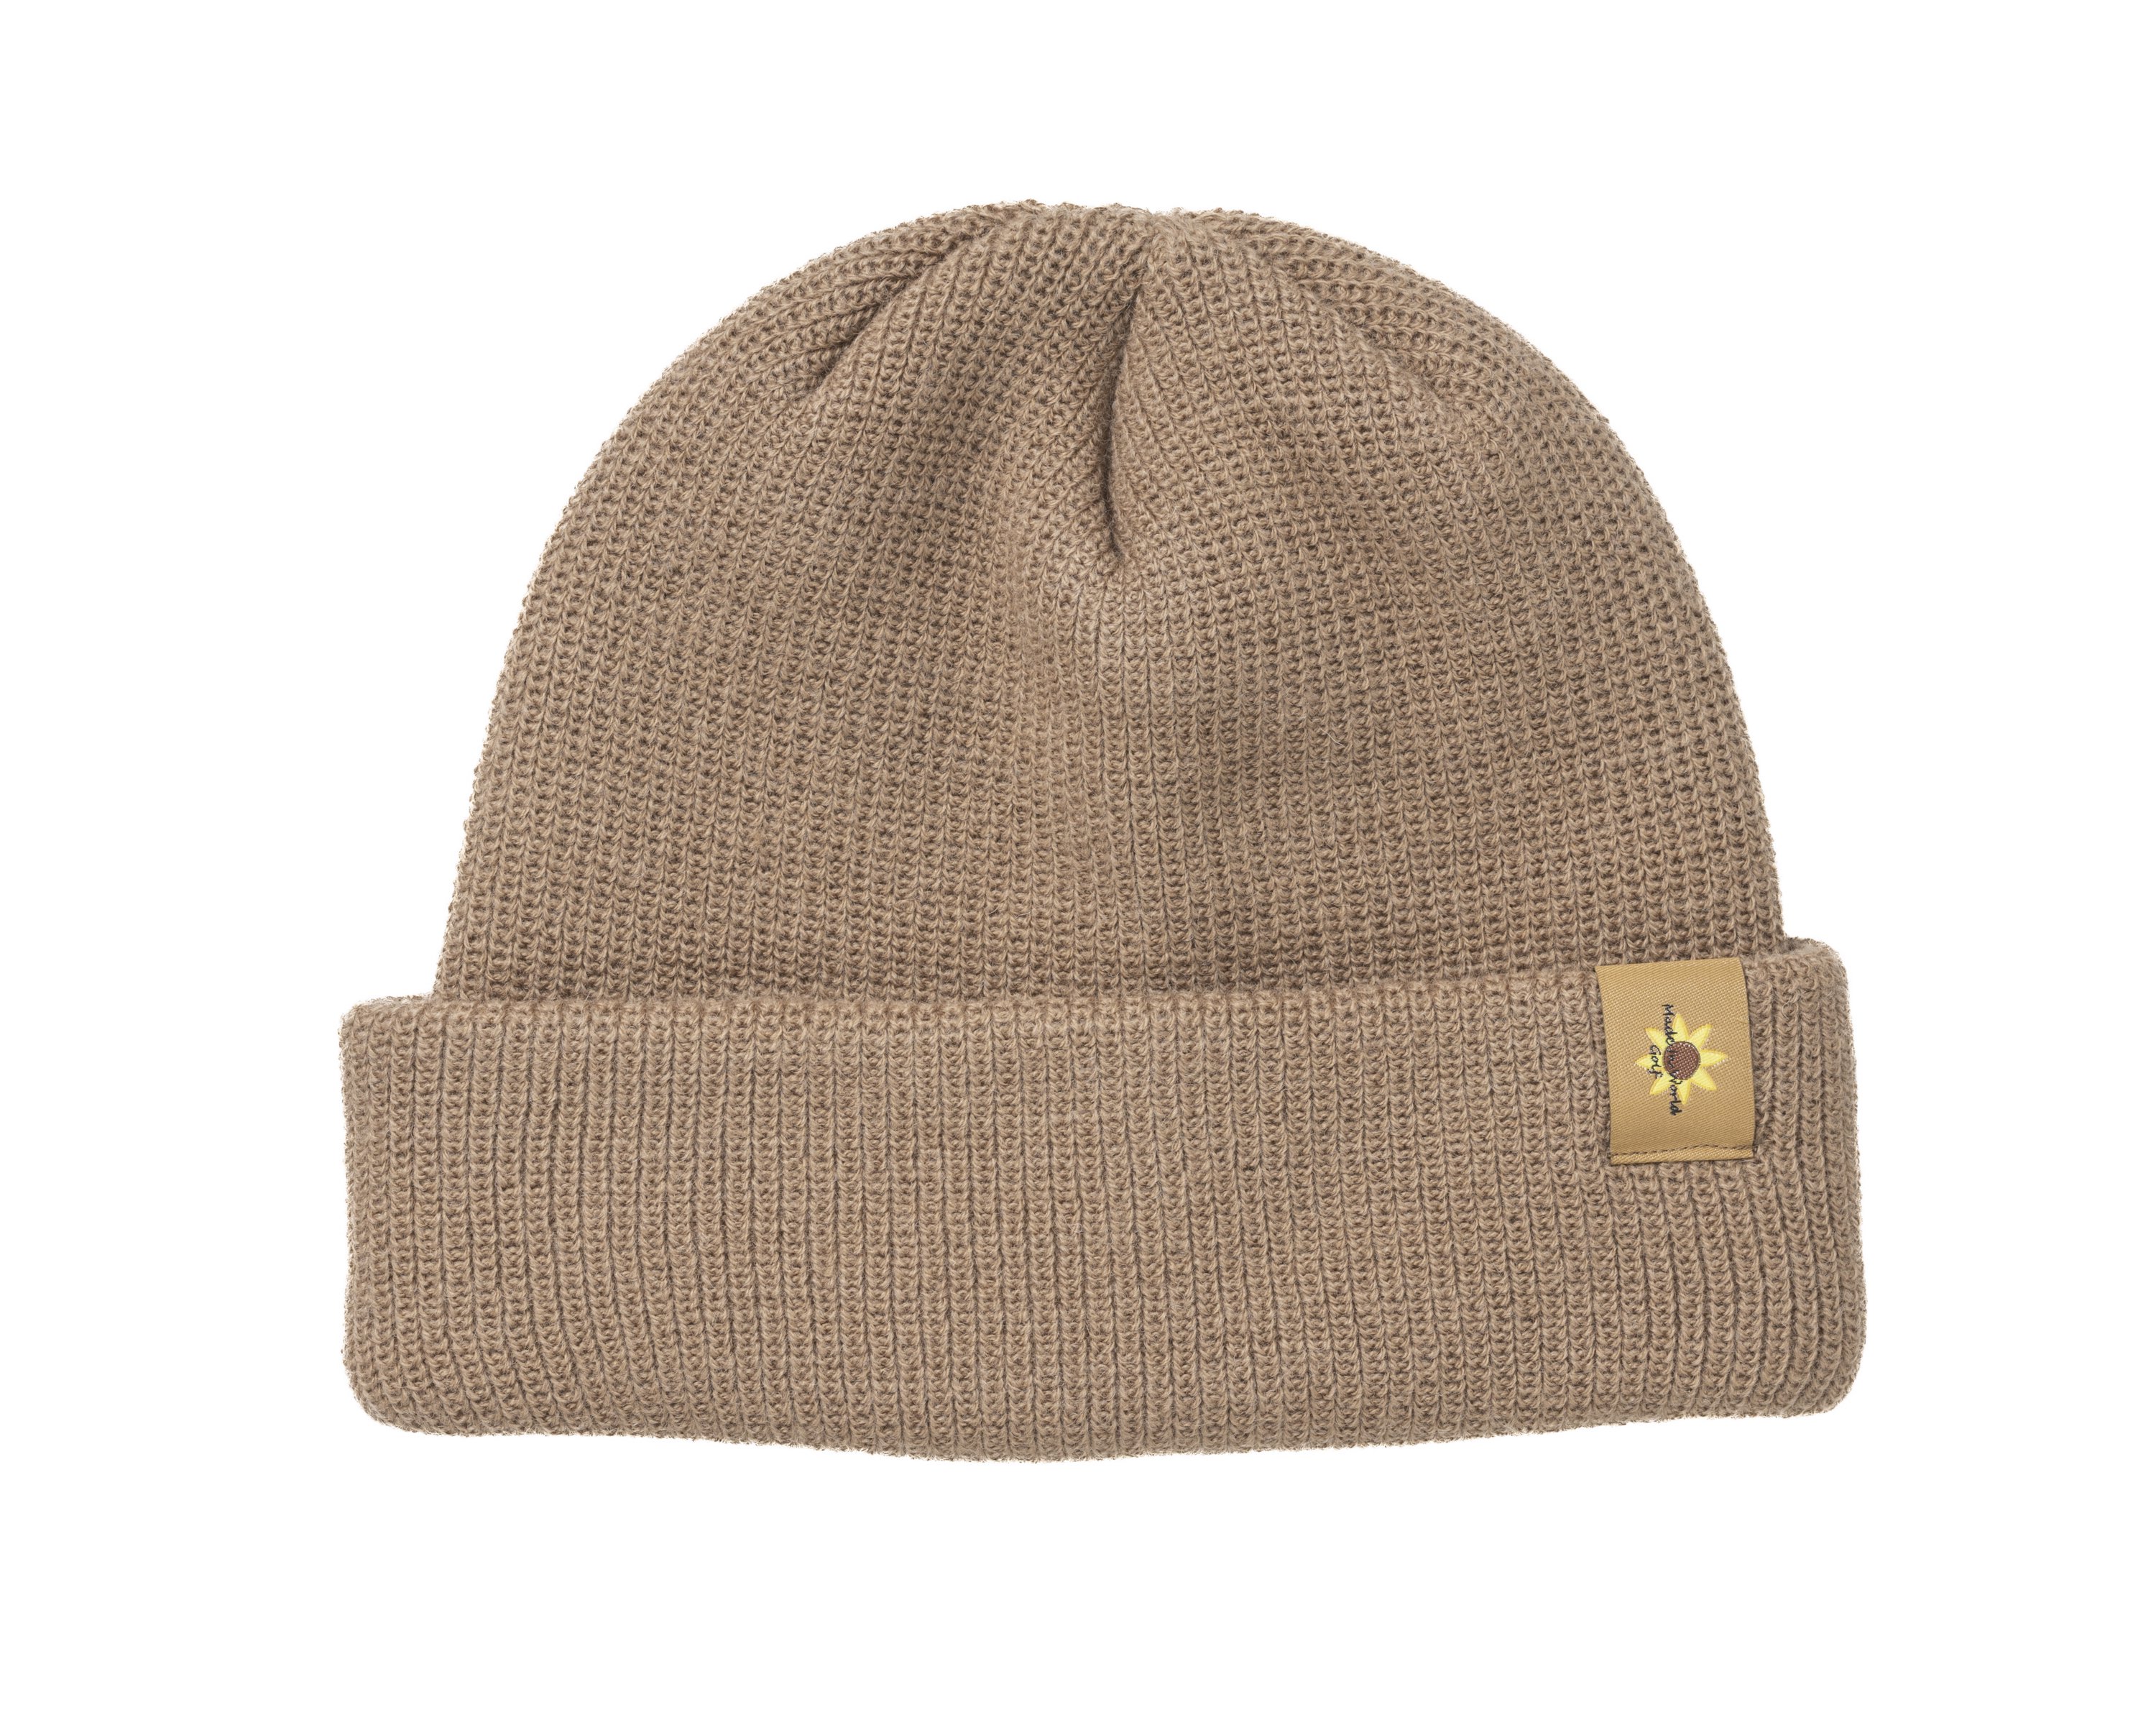 <img class='new_mark_img1' src='https://img.shop-pro.jp/img/new/icons14.gif' style='border:none;display:inline;margin:0px;padding:0px;width:auto;' />KNIT CAP<br />beige